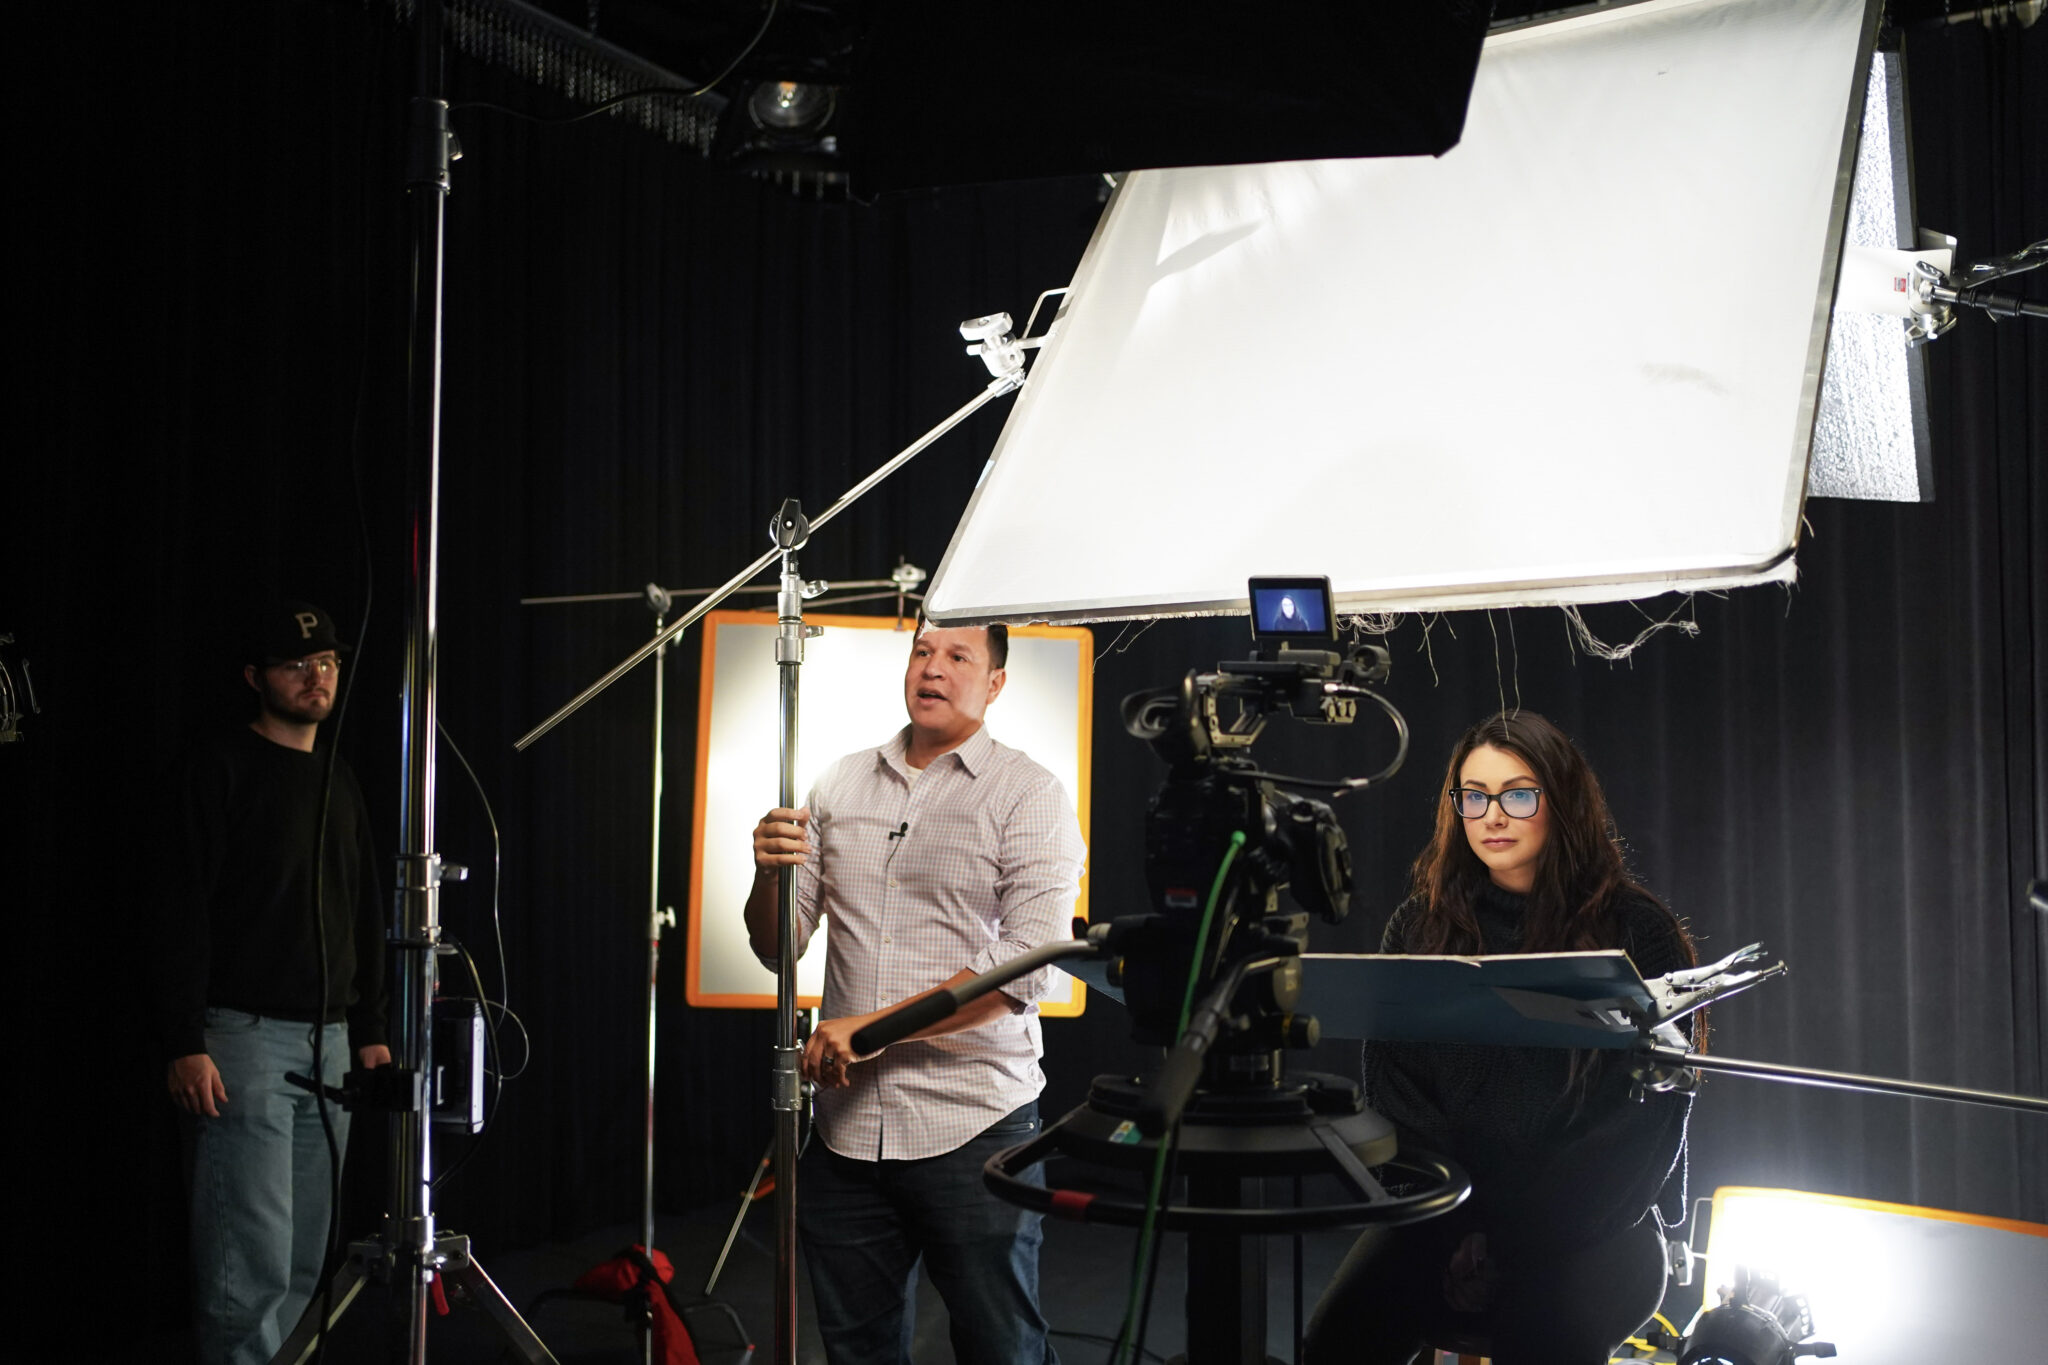 A professor demonstrates lighting setups in a photo studio with a student.